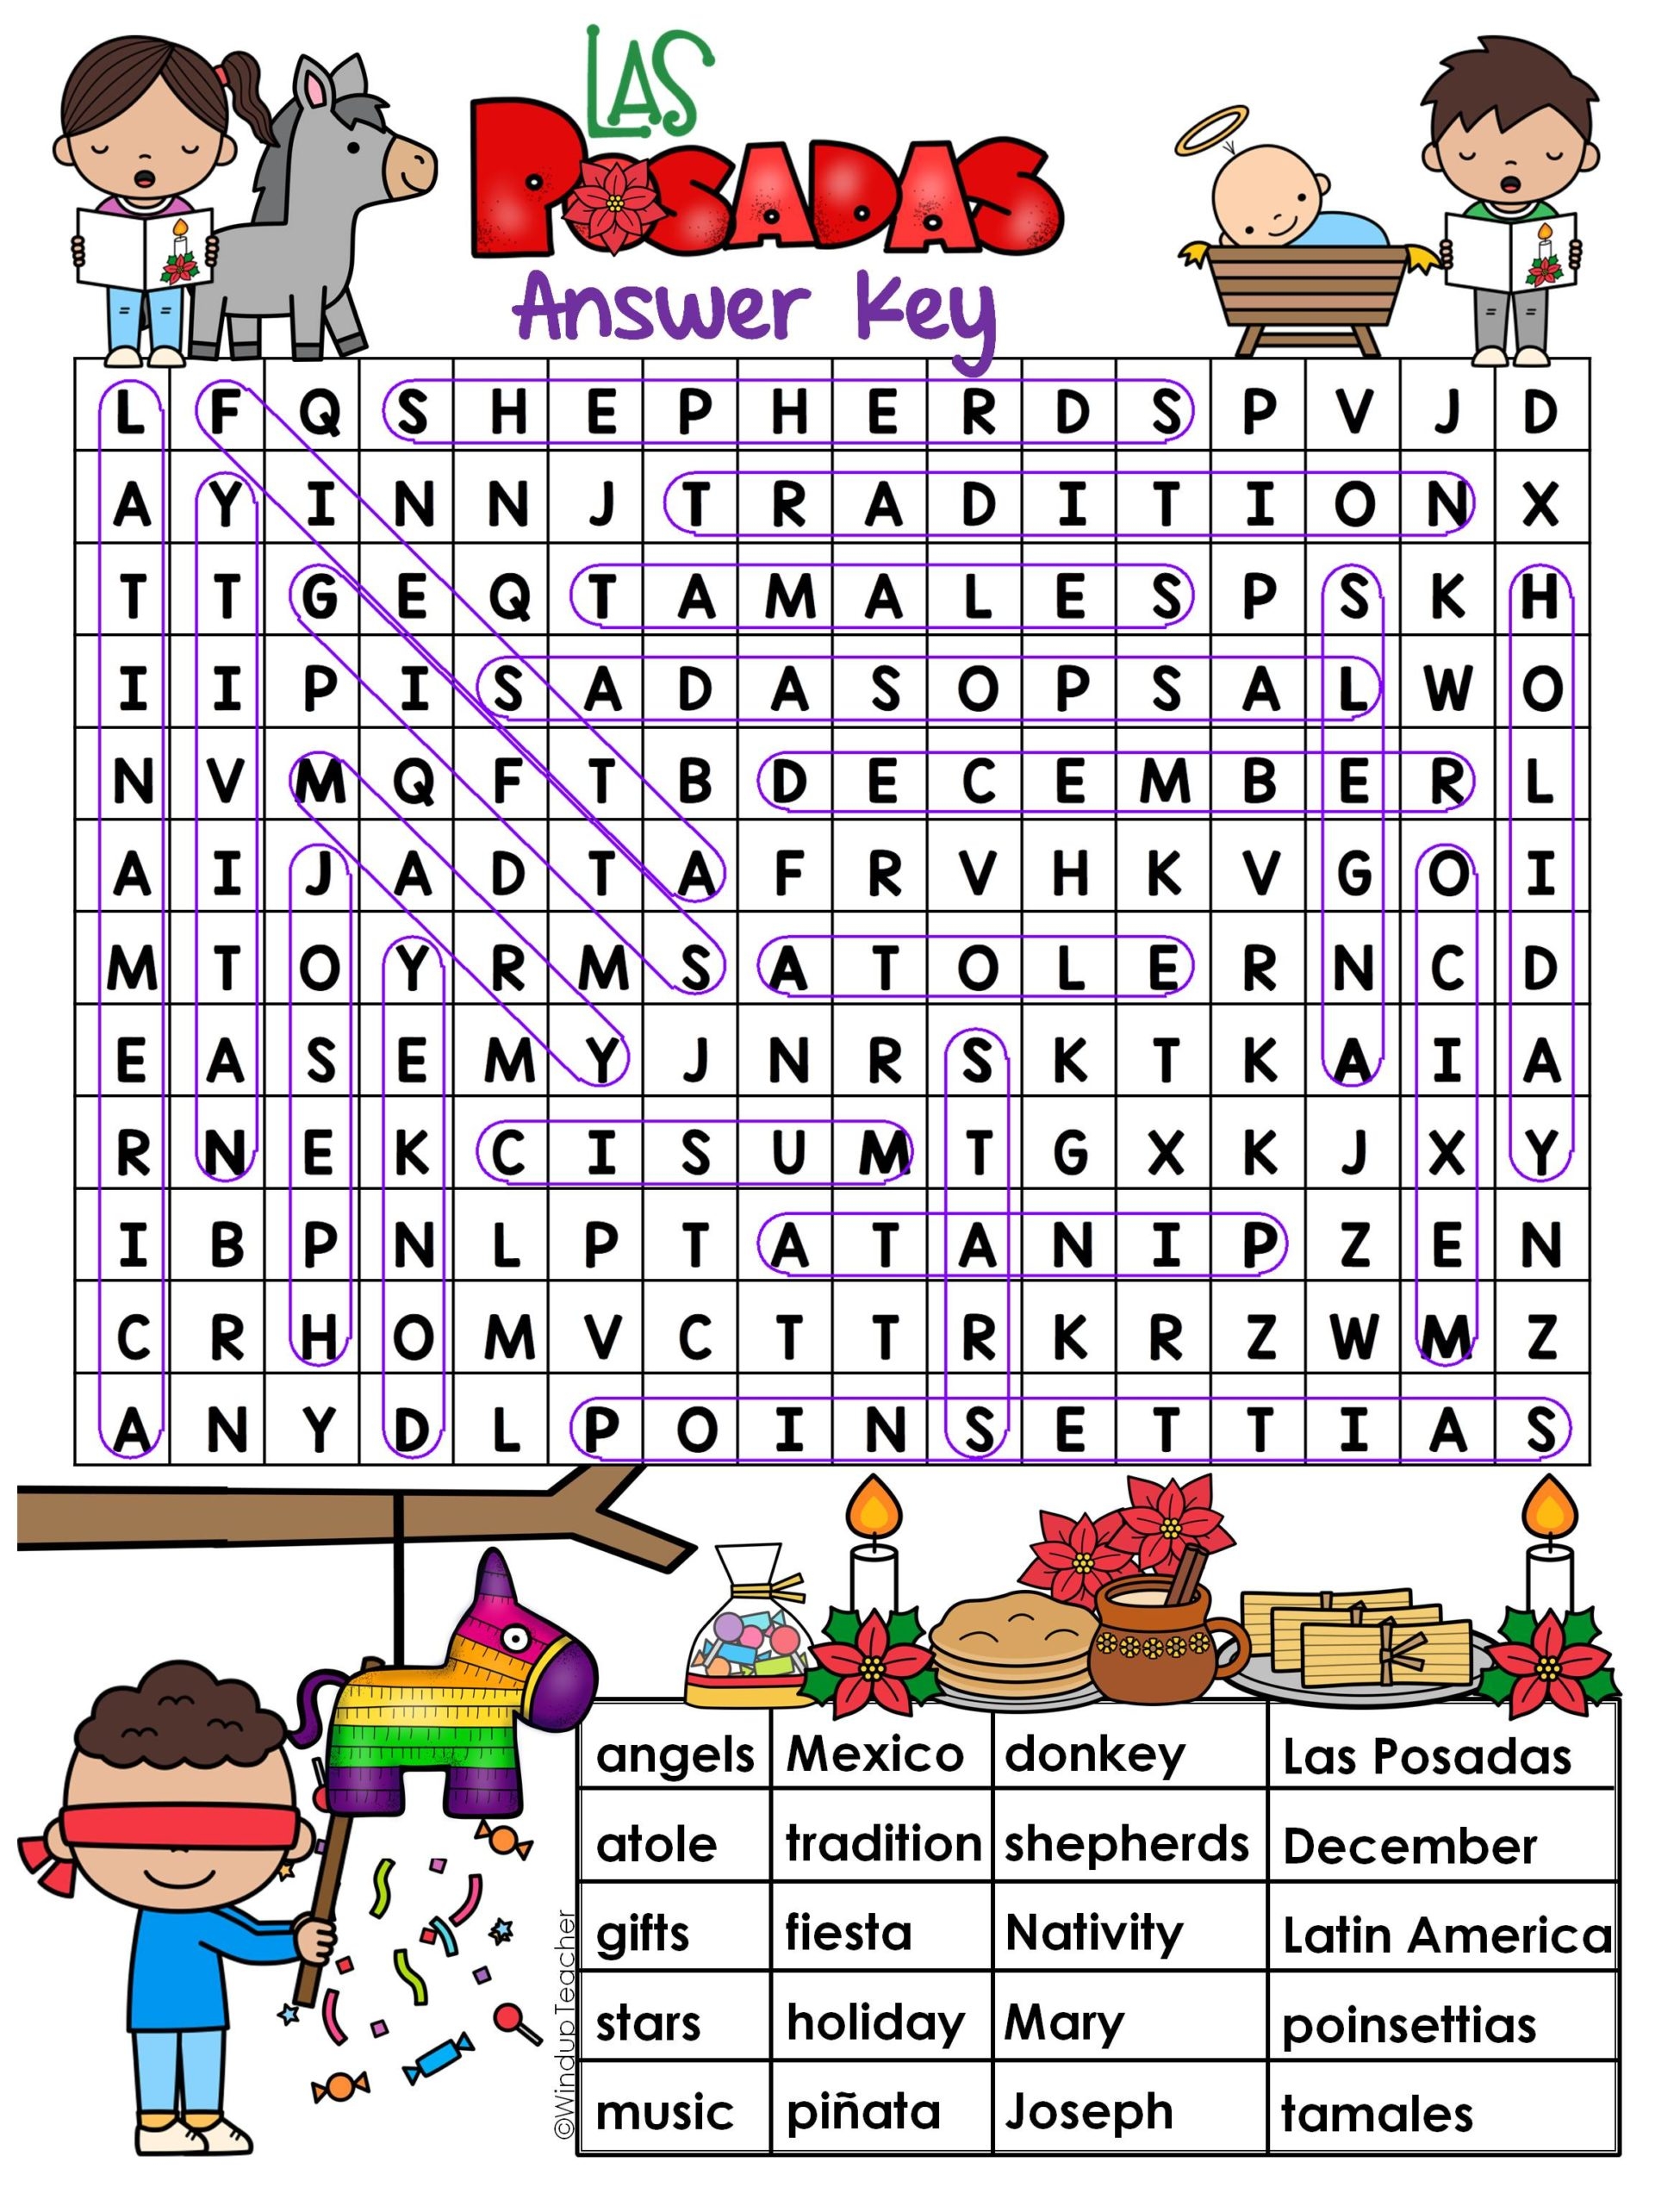 Las Posadas Word Search HARD Puzzle Ready To Go Made By Teachers